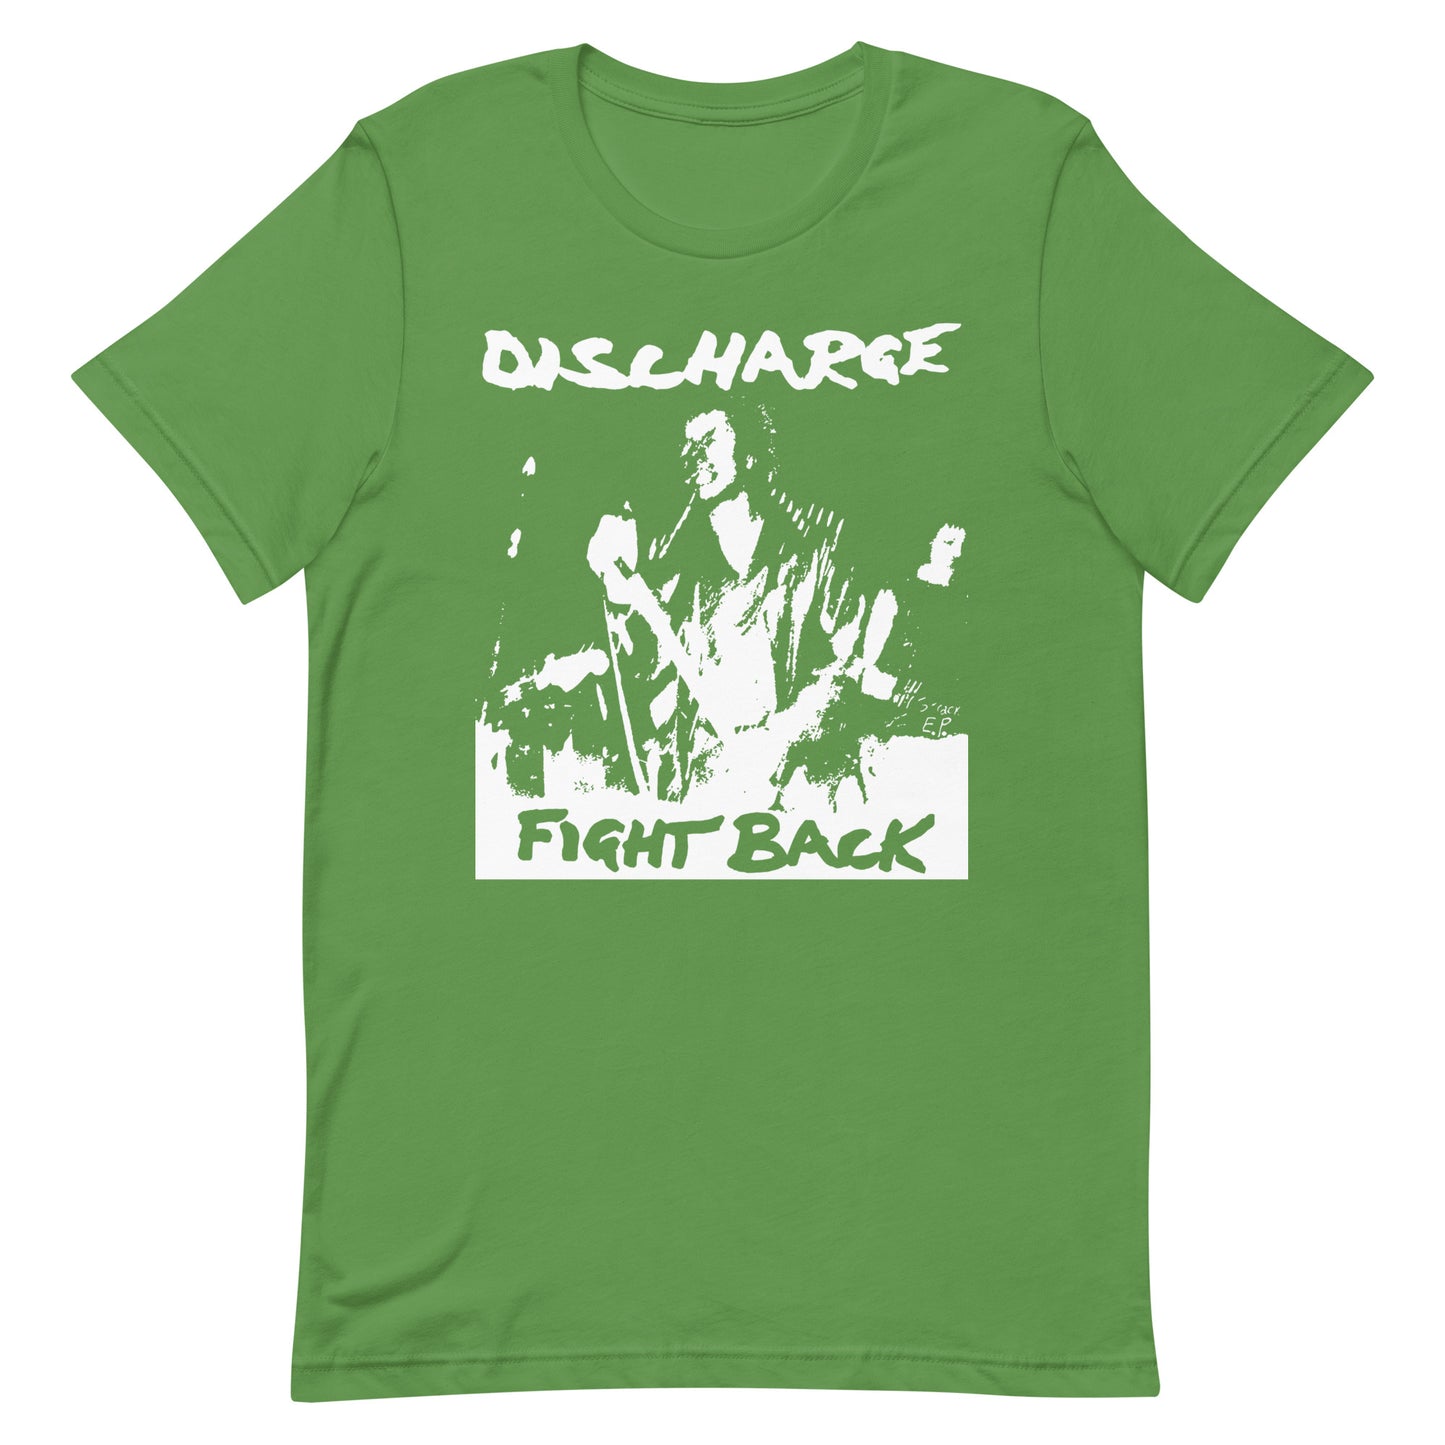 Discharge - Fight Back T-Shirt